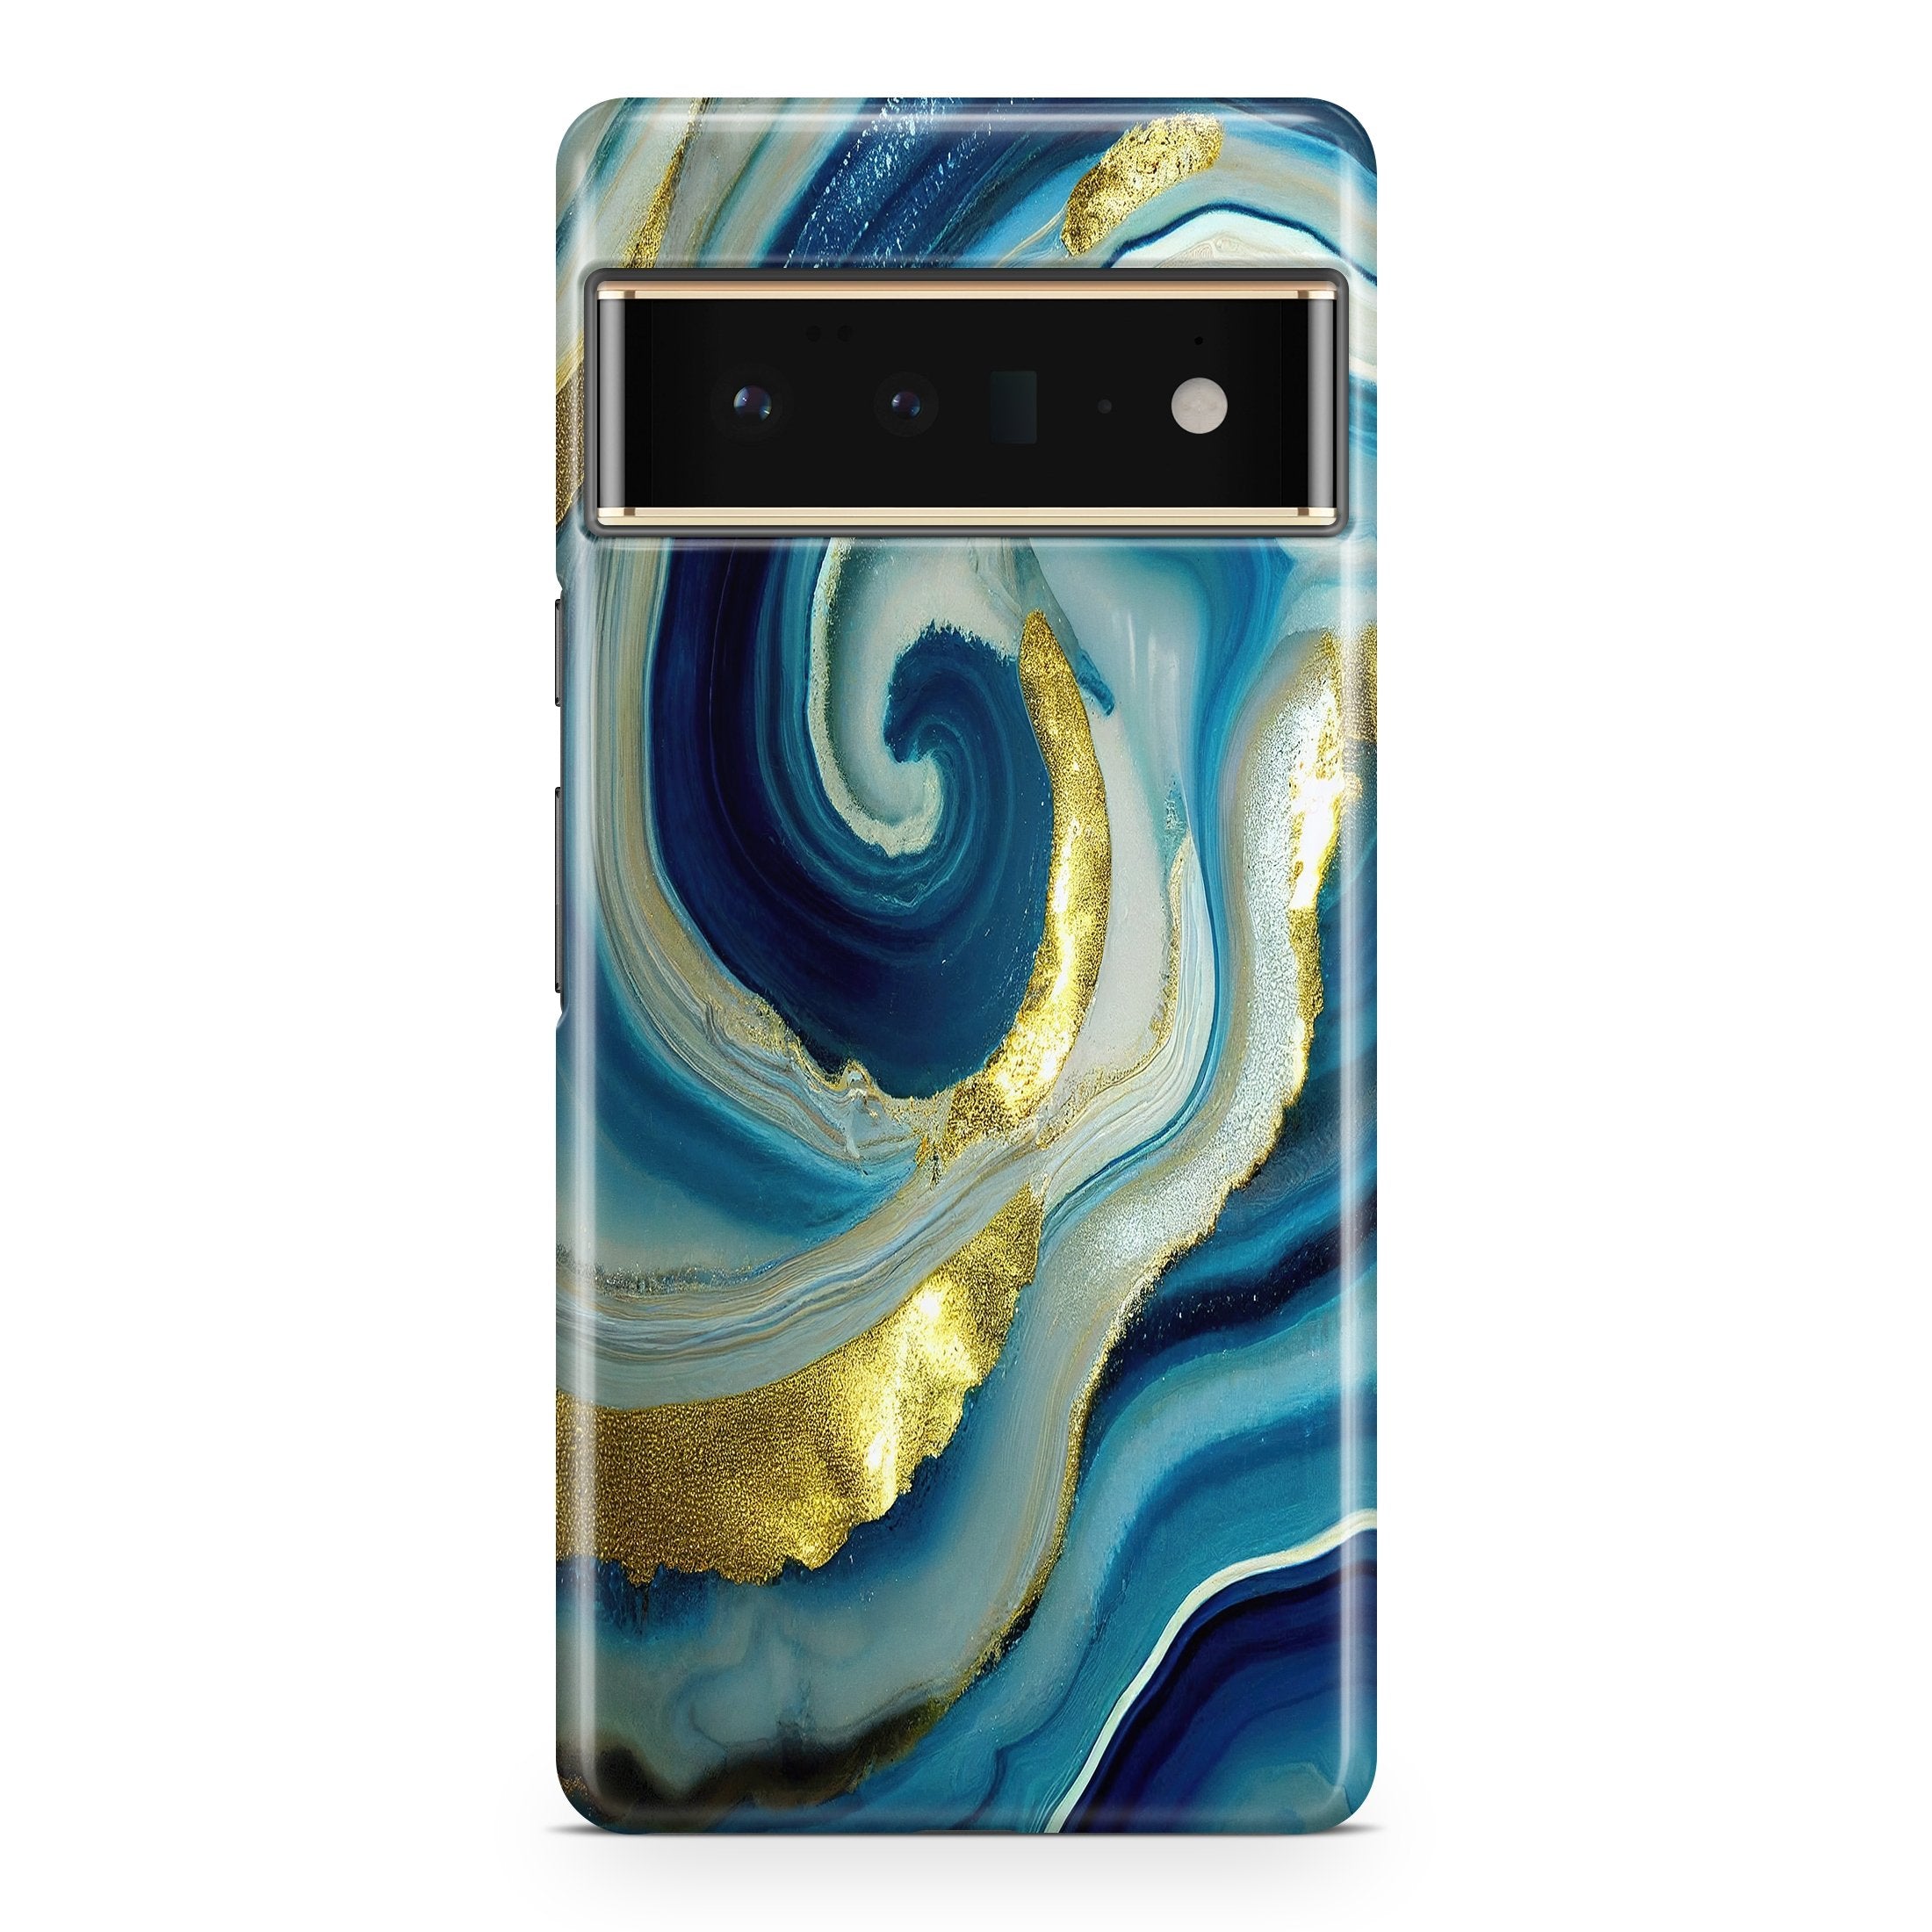 Catalyst Blue Marble - Google phone case designs by CaseSwagger